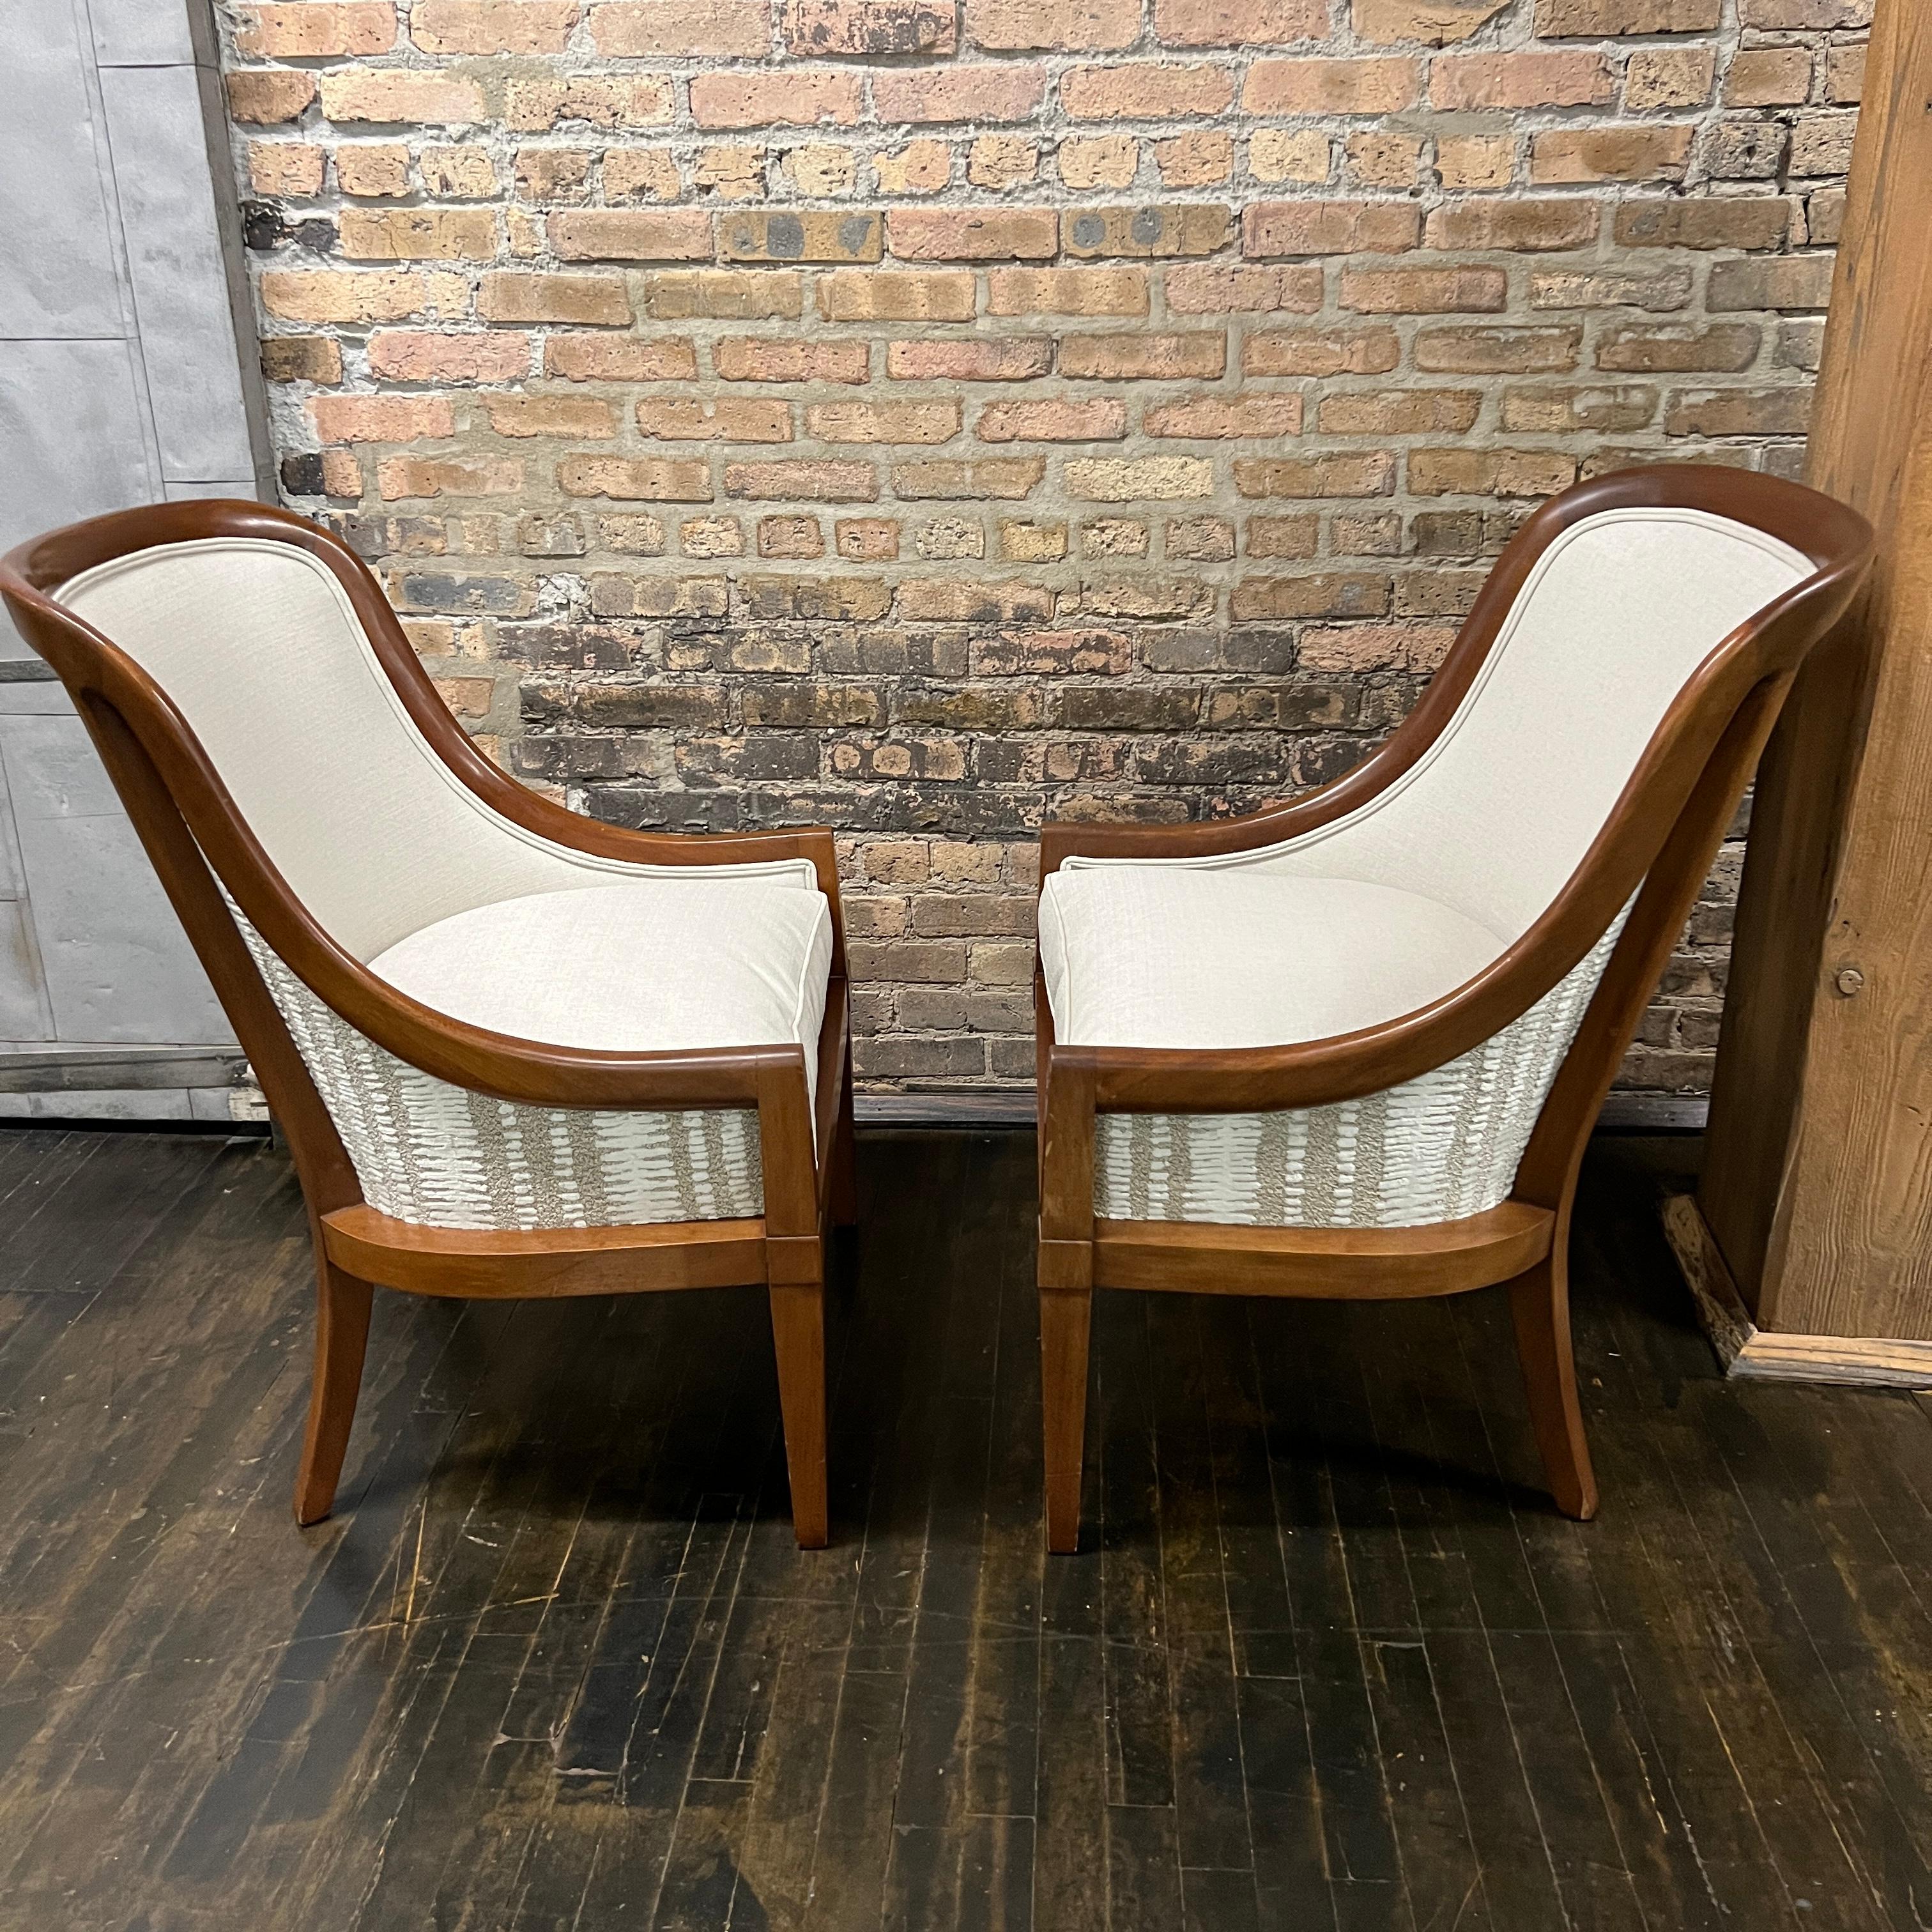 Mid-20th Century Pair of 1940's Spoon Back Lounge Chairs with Walnut Frames For Sale